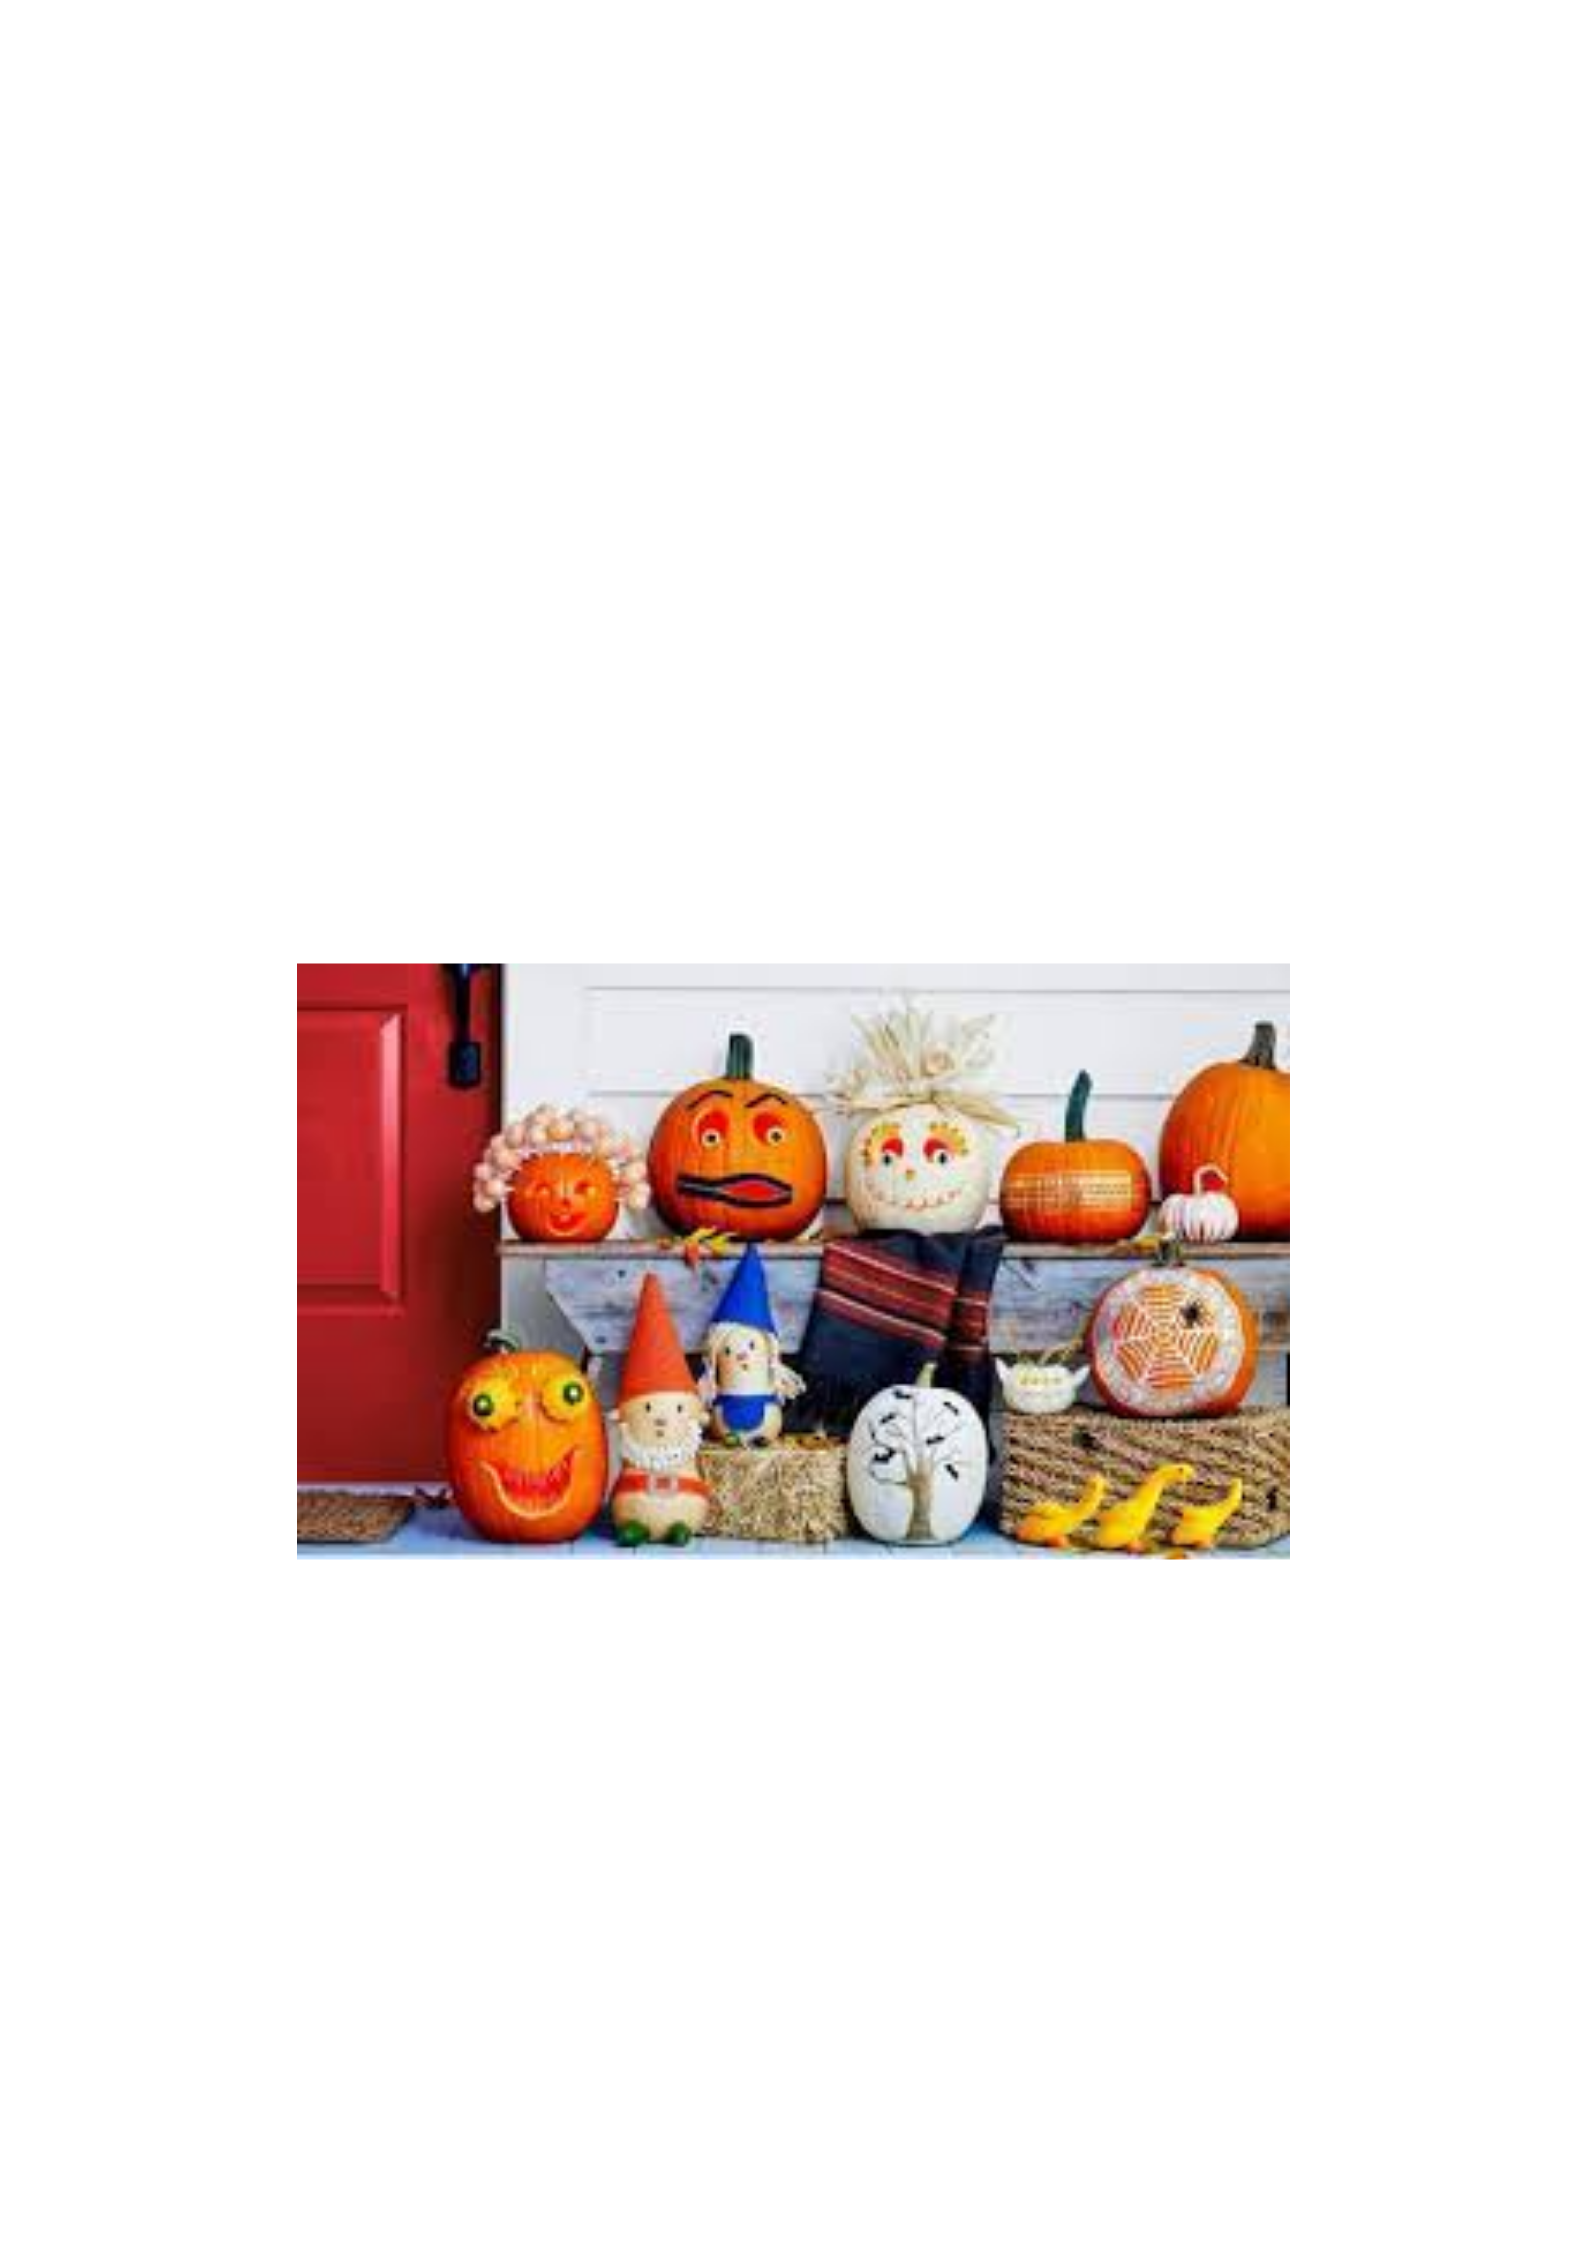 Take and Make Pumpkin Decorating Contest